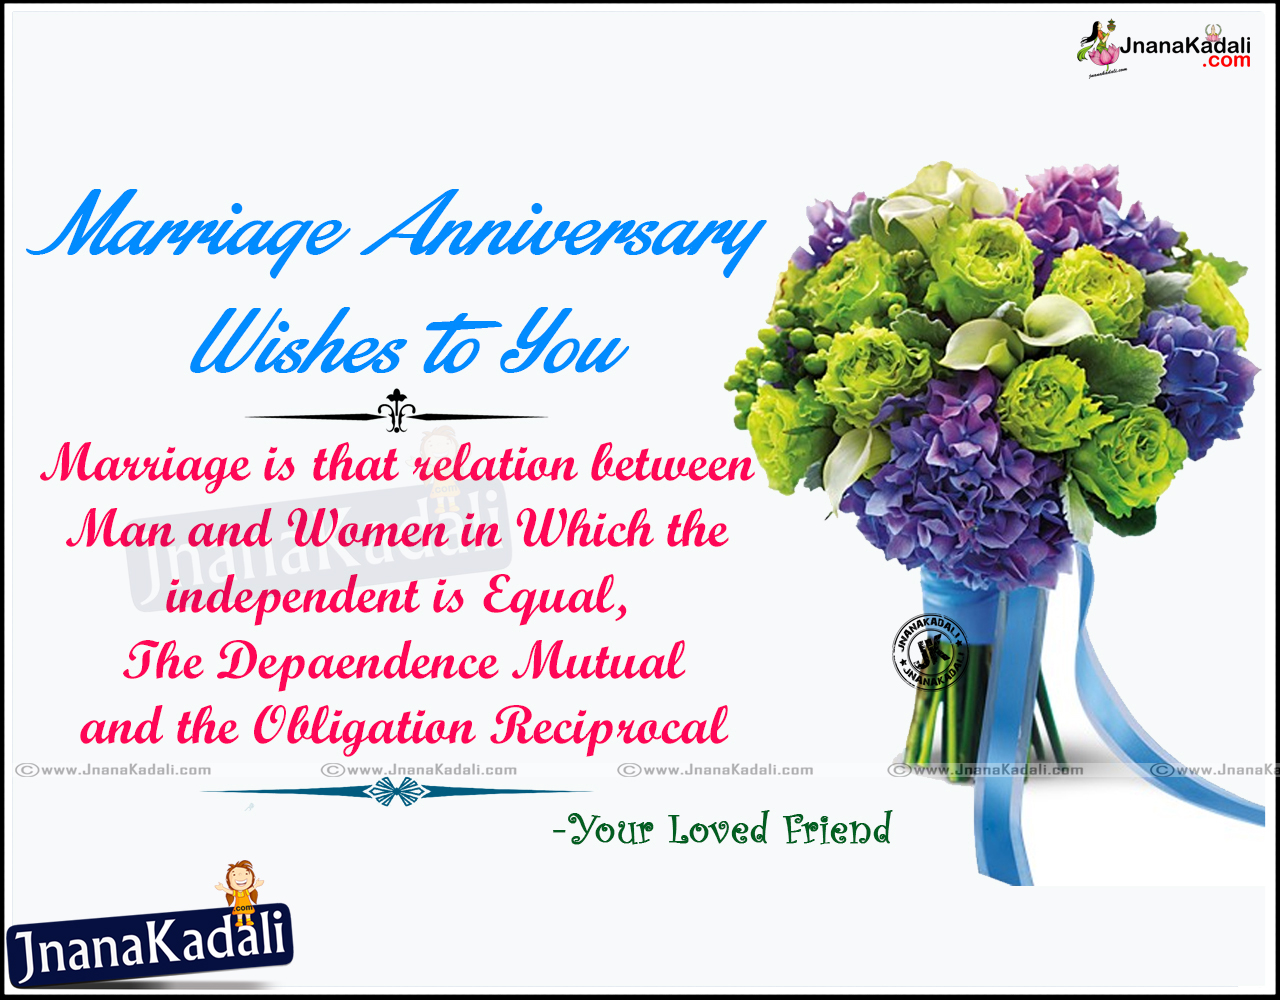 Wedding Anniversary Quotes For Friends In English Best marriage wishes and quotes images jnana kadali